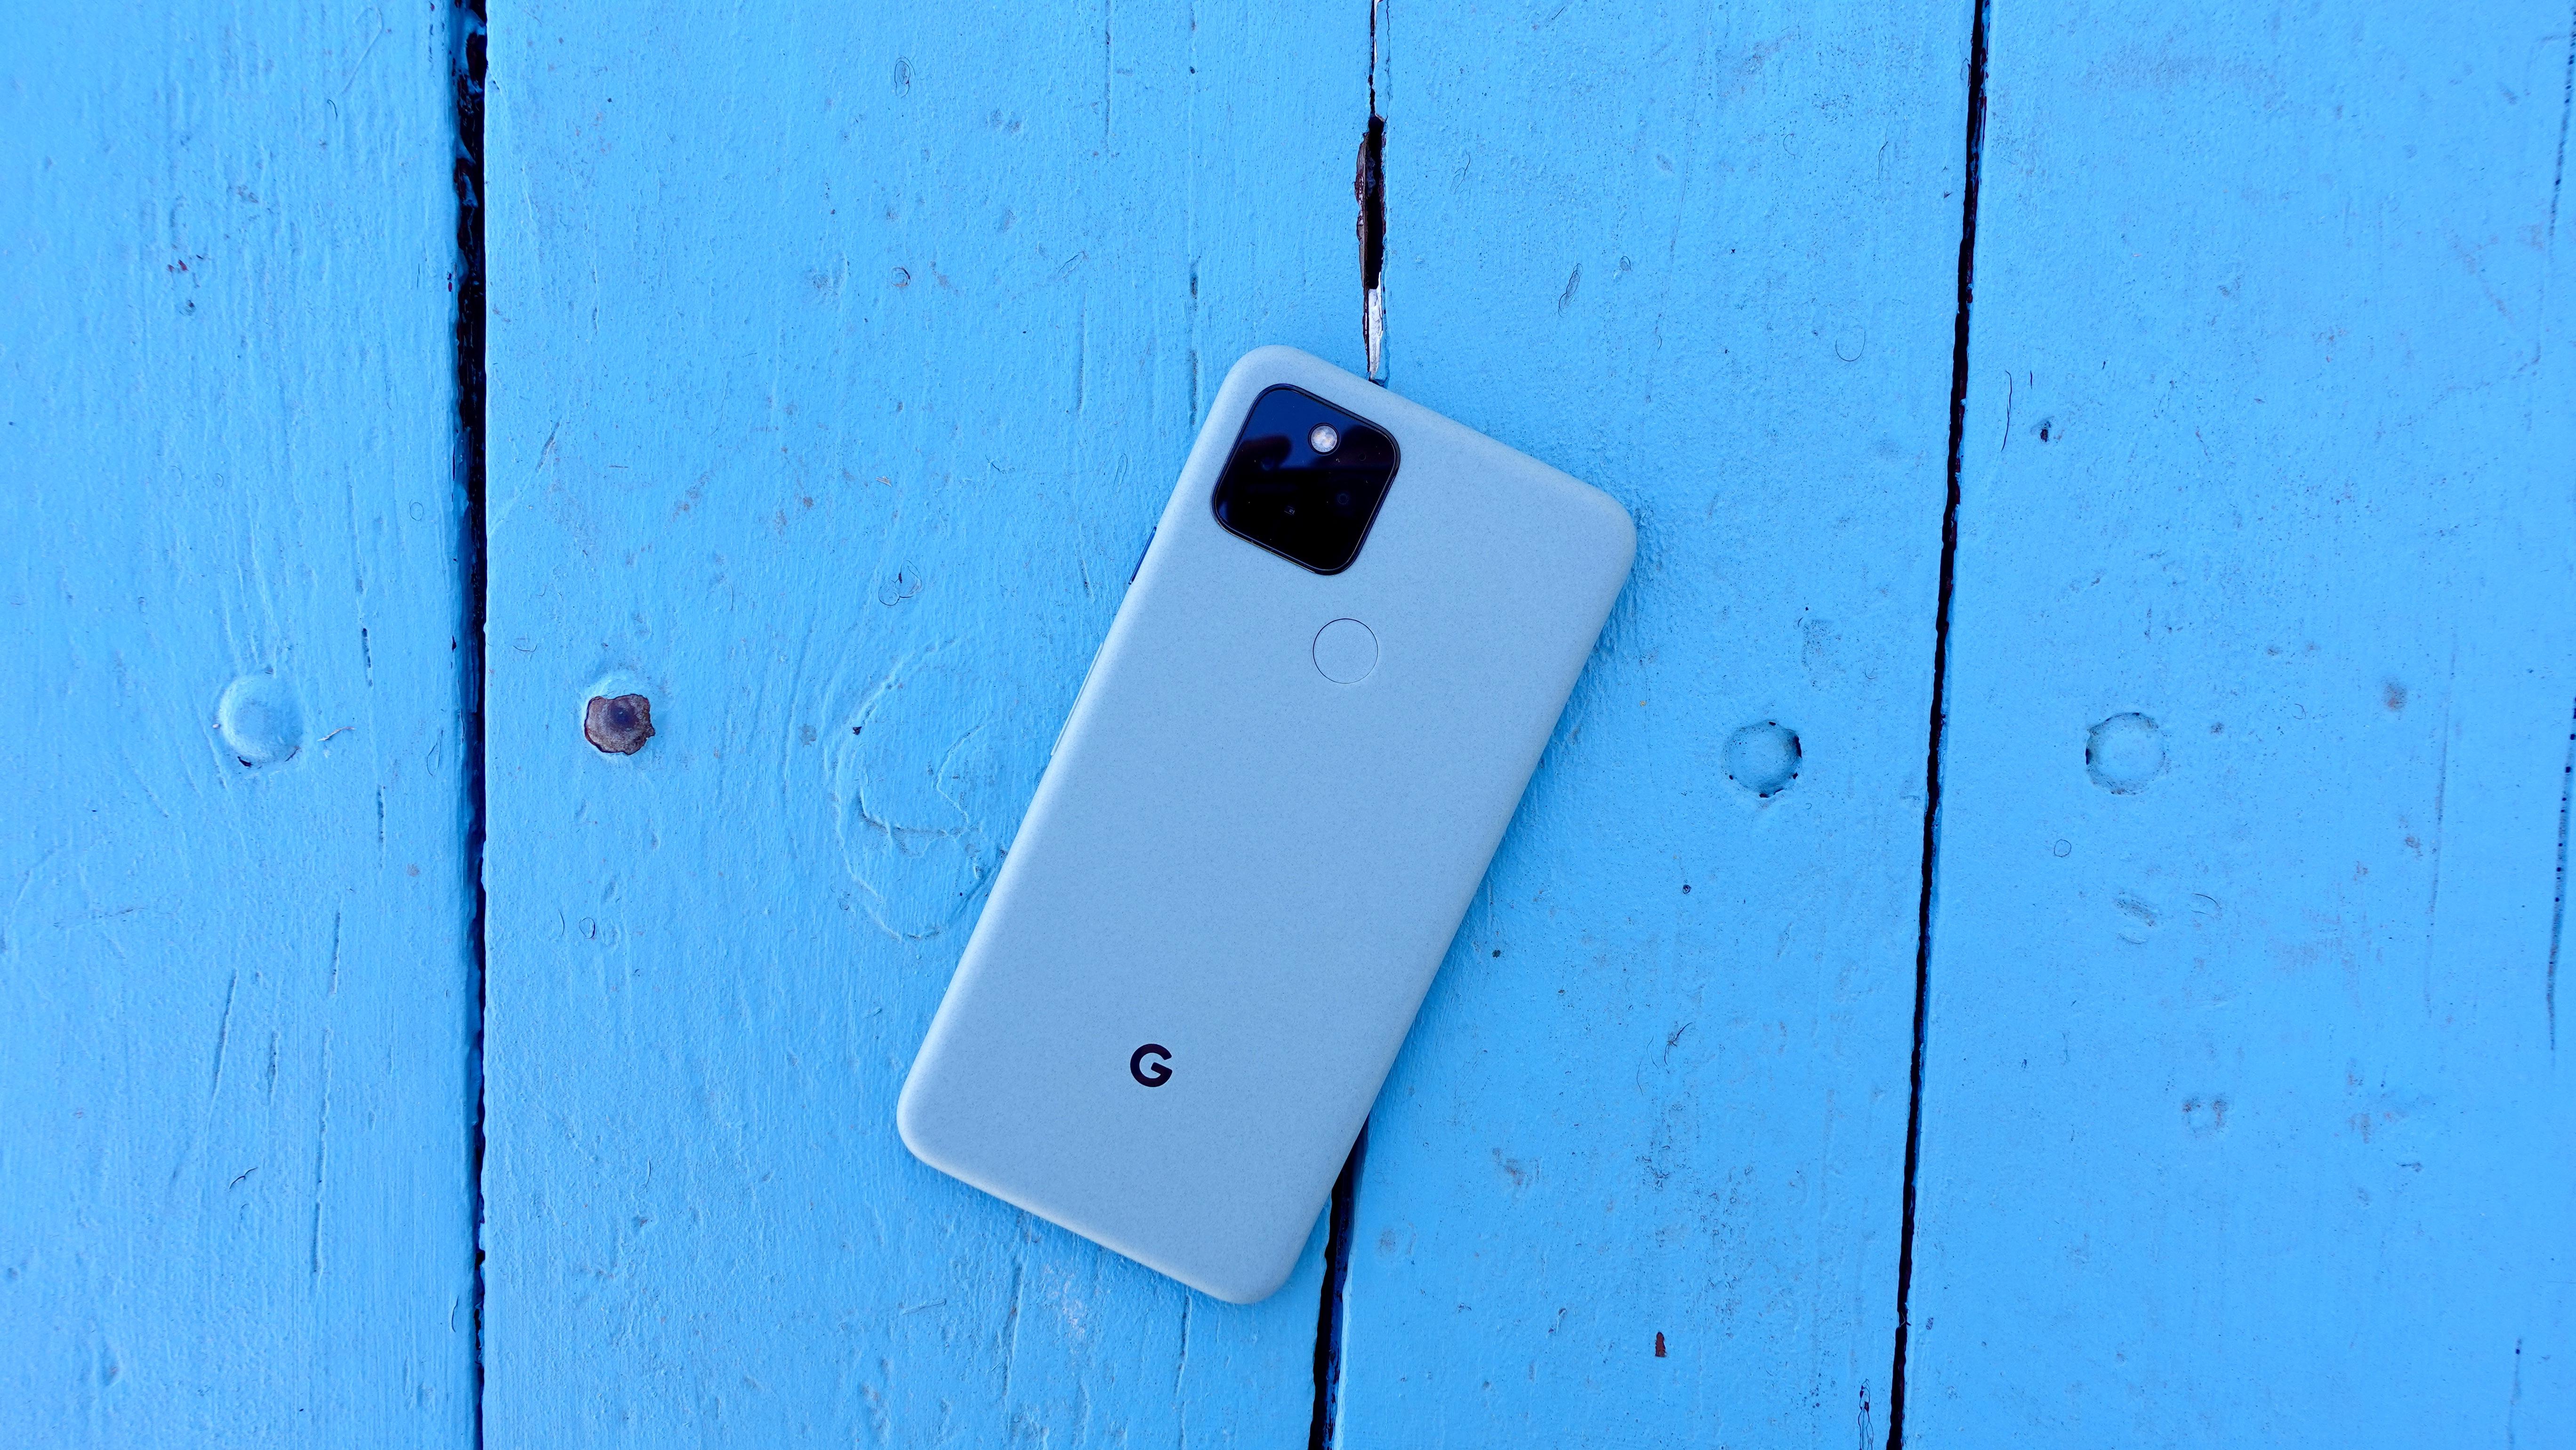 Google Pixel 5 review: Less is more. In fact, it's exceptional | ZDNET